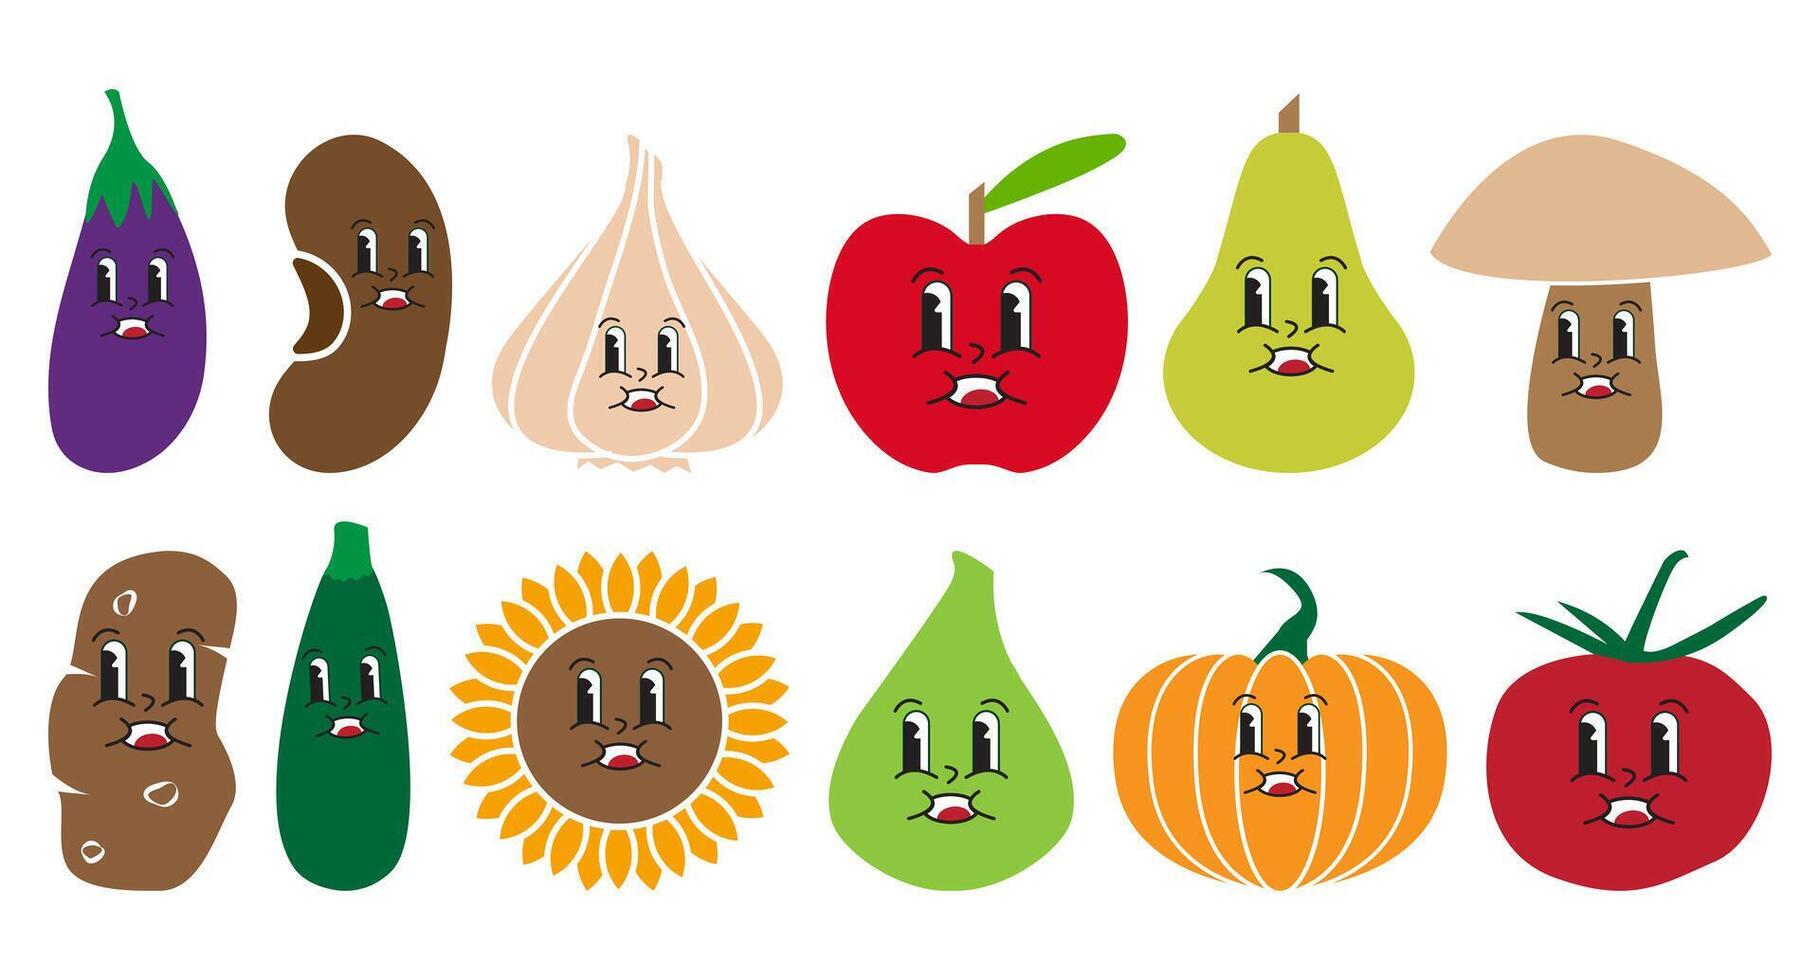 Groovy Cute Vegetable and Fruit Set of Eggplant, Bean, Garlic, Apple, Pear, Mushroom, Potato, Zucchini, Sunflower, Fig, Pumpkin and Tomato Characters Isolated on White Background vector